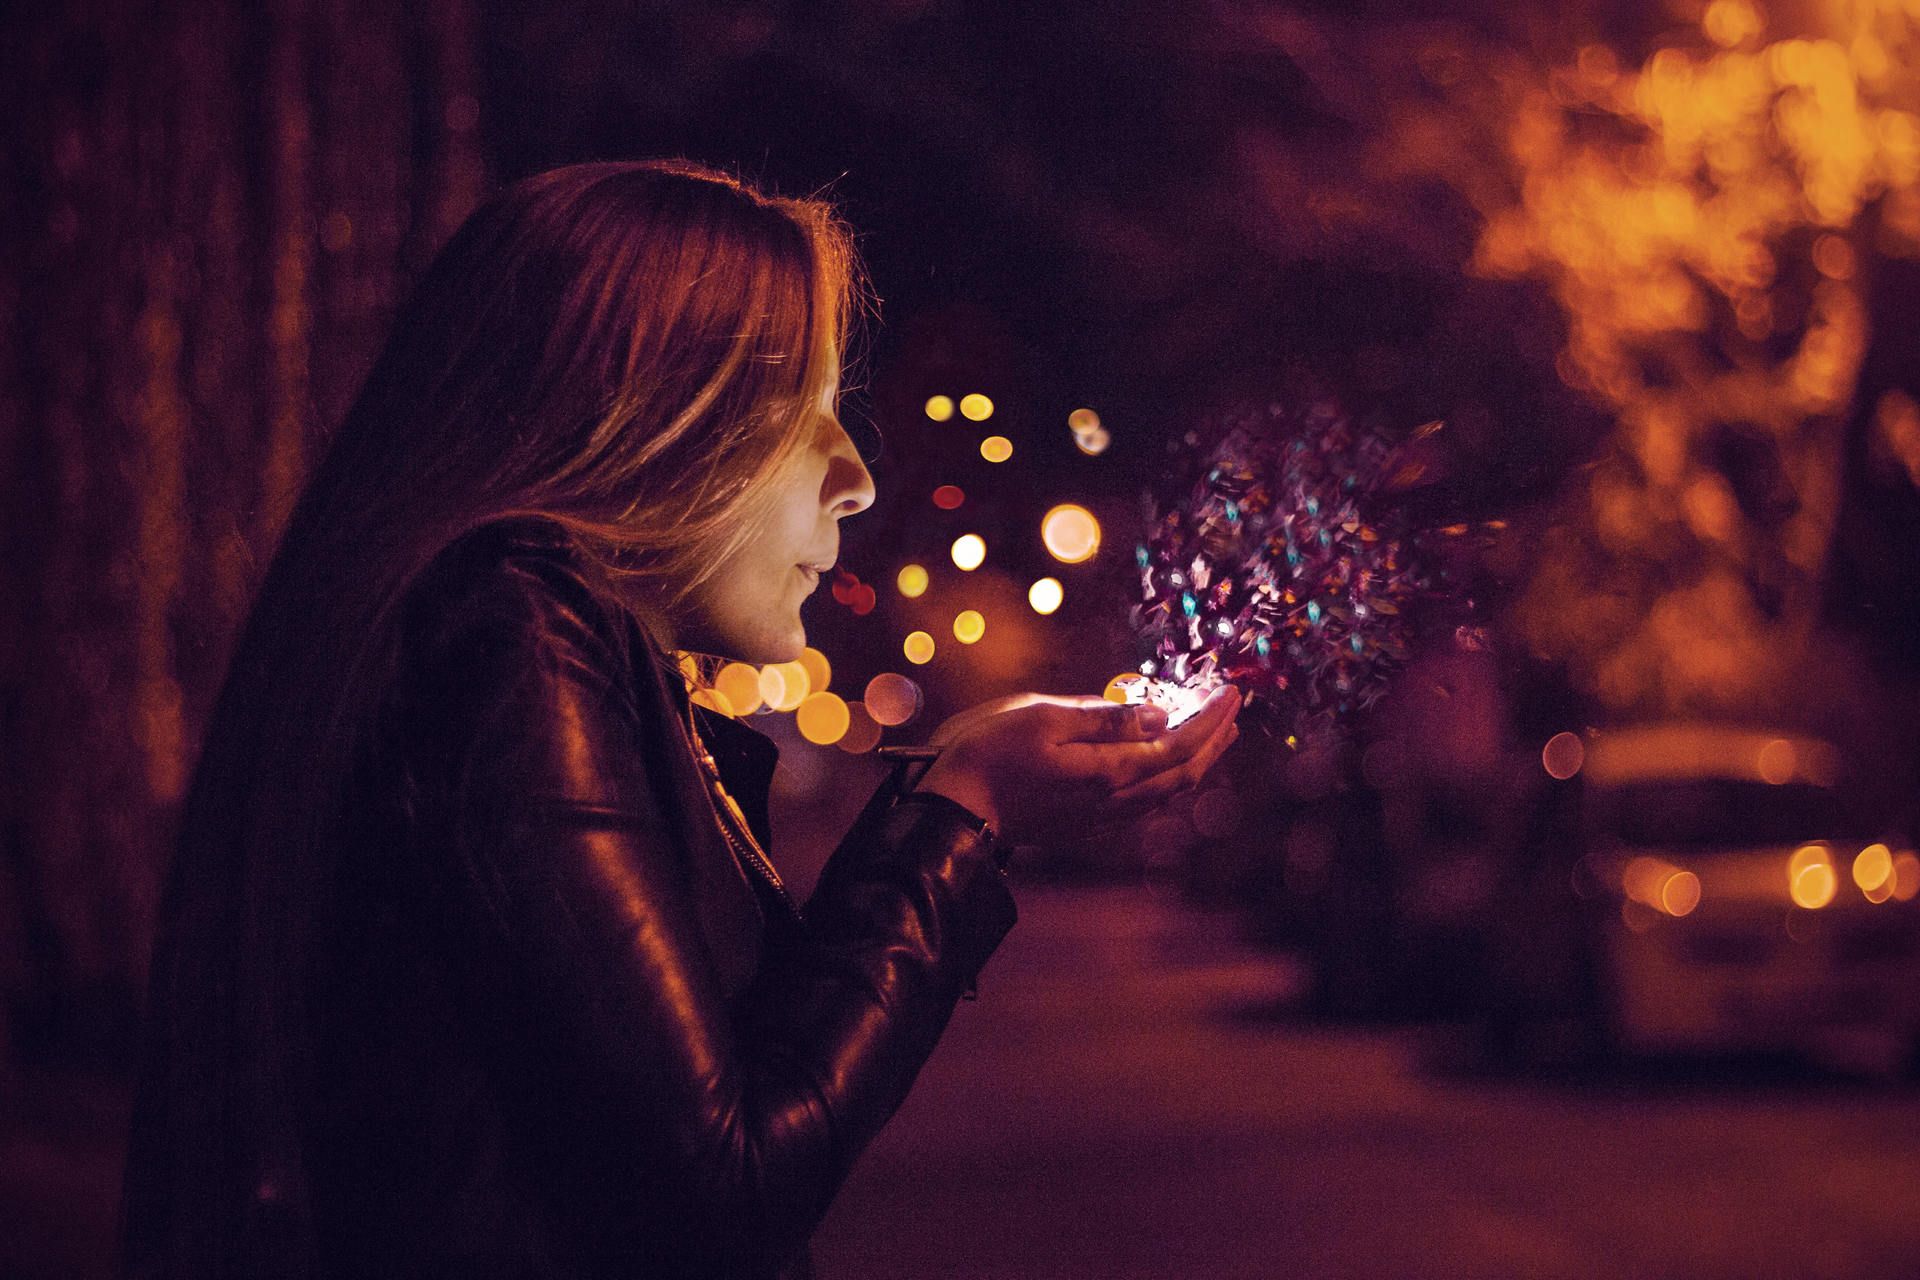 Woman outside at night blow lighted dust out of her cupped hands